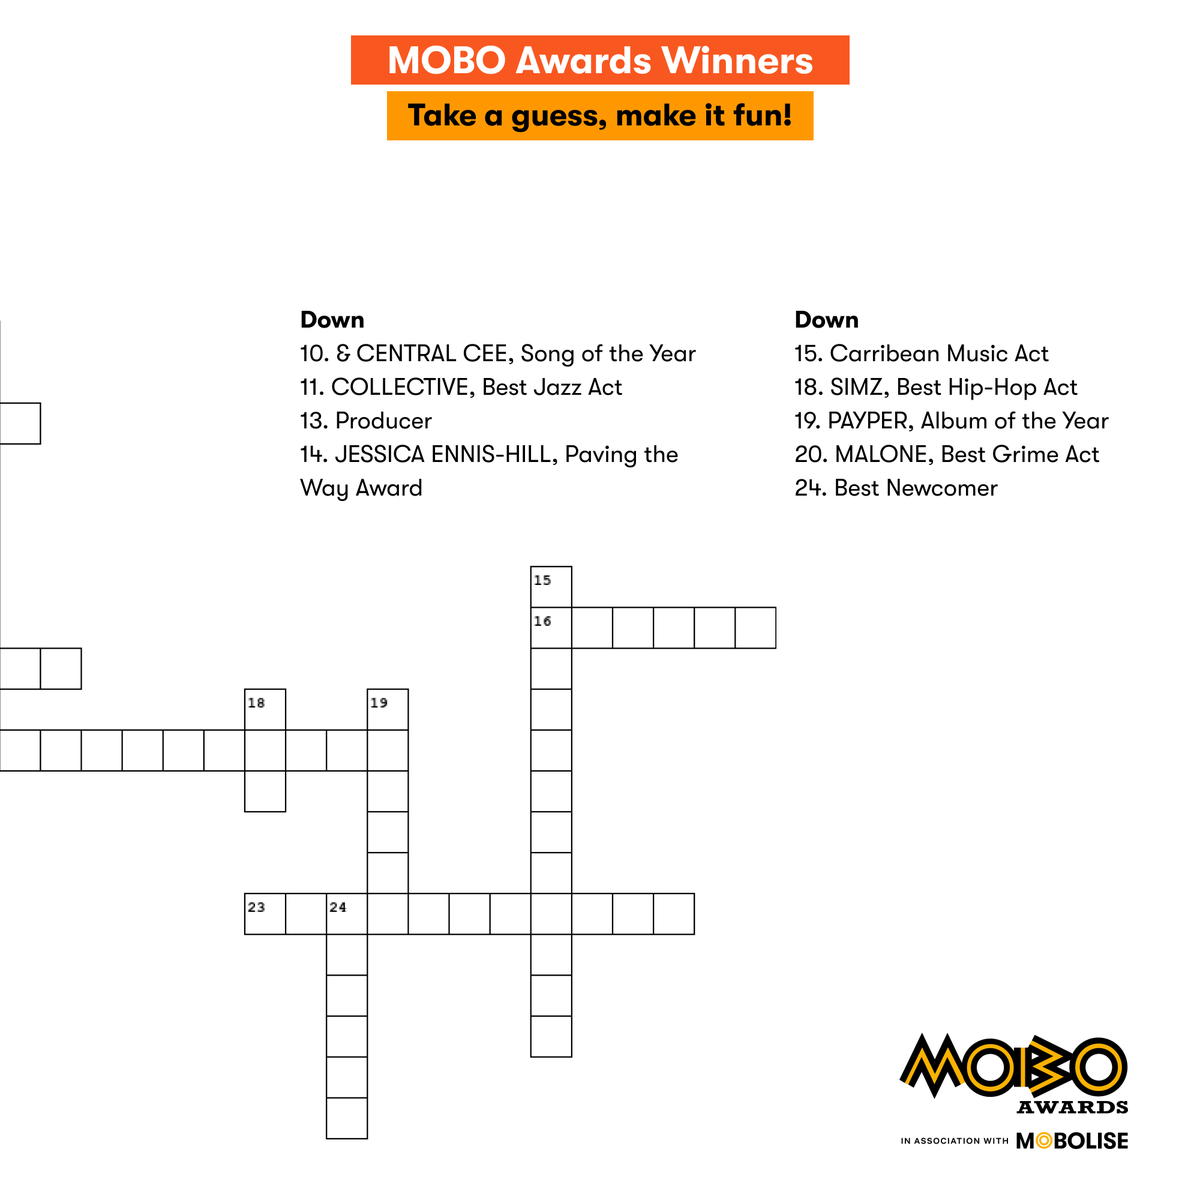 We've got a game for you. Can you solve this puzzle on the @MOBOAwards winners? Share your answers in the comments. We just may have something special for you. #MOBOAwards #MOBOLISEImpact